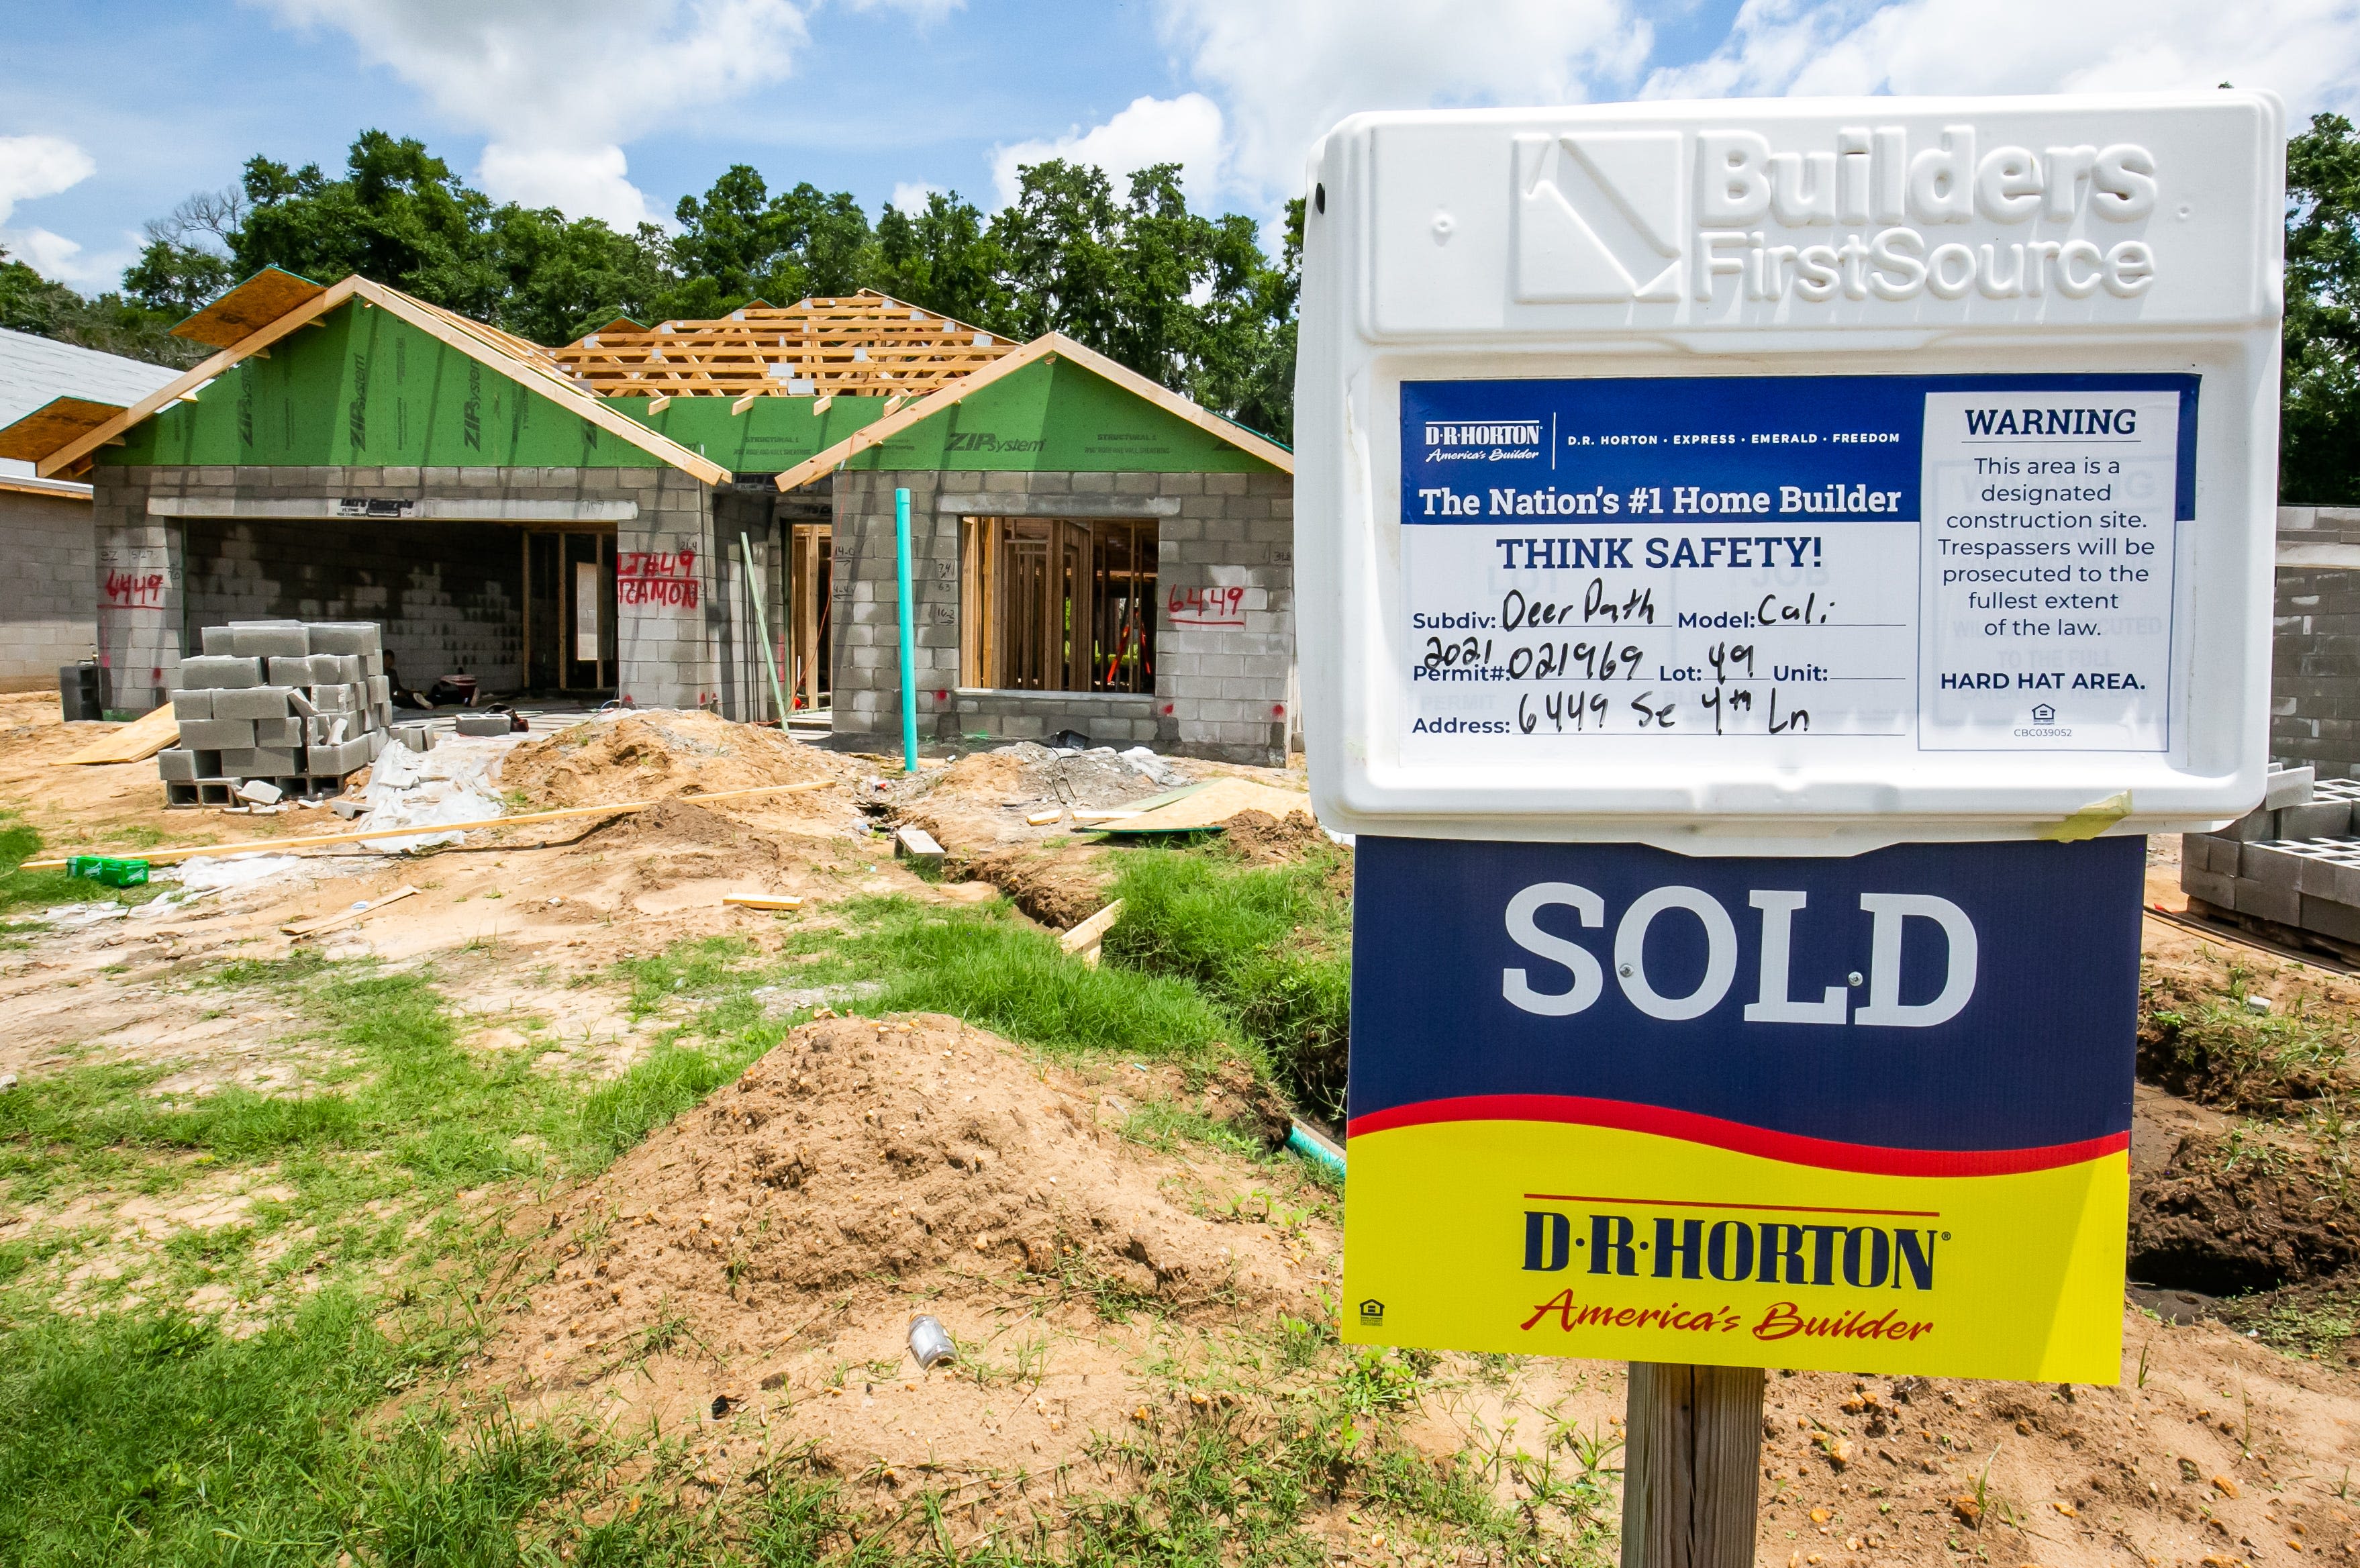 Ocala ranks No. 4 on list of U.S. cities with fastest rising home prices